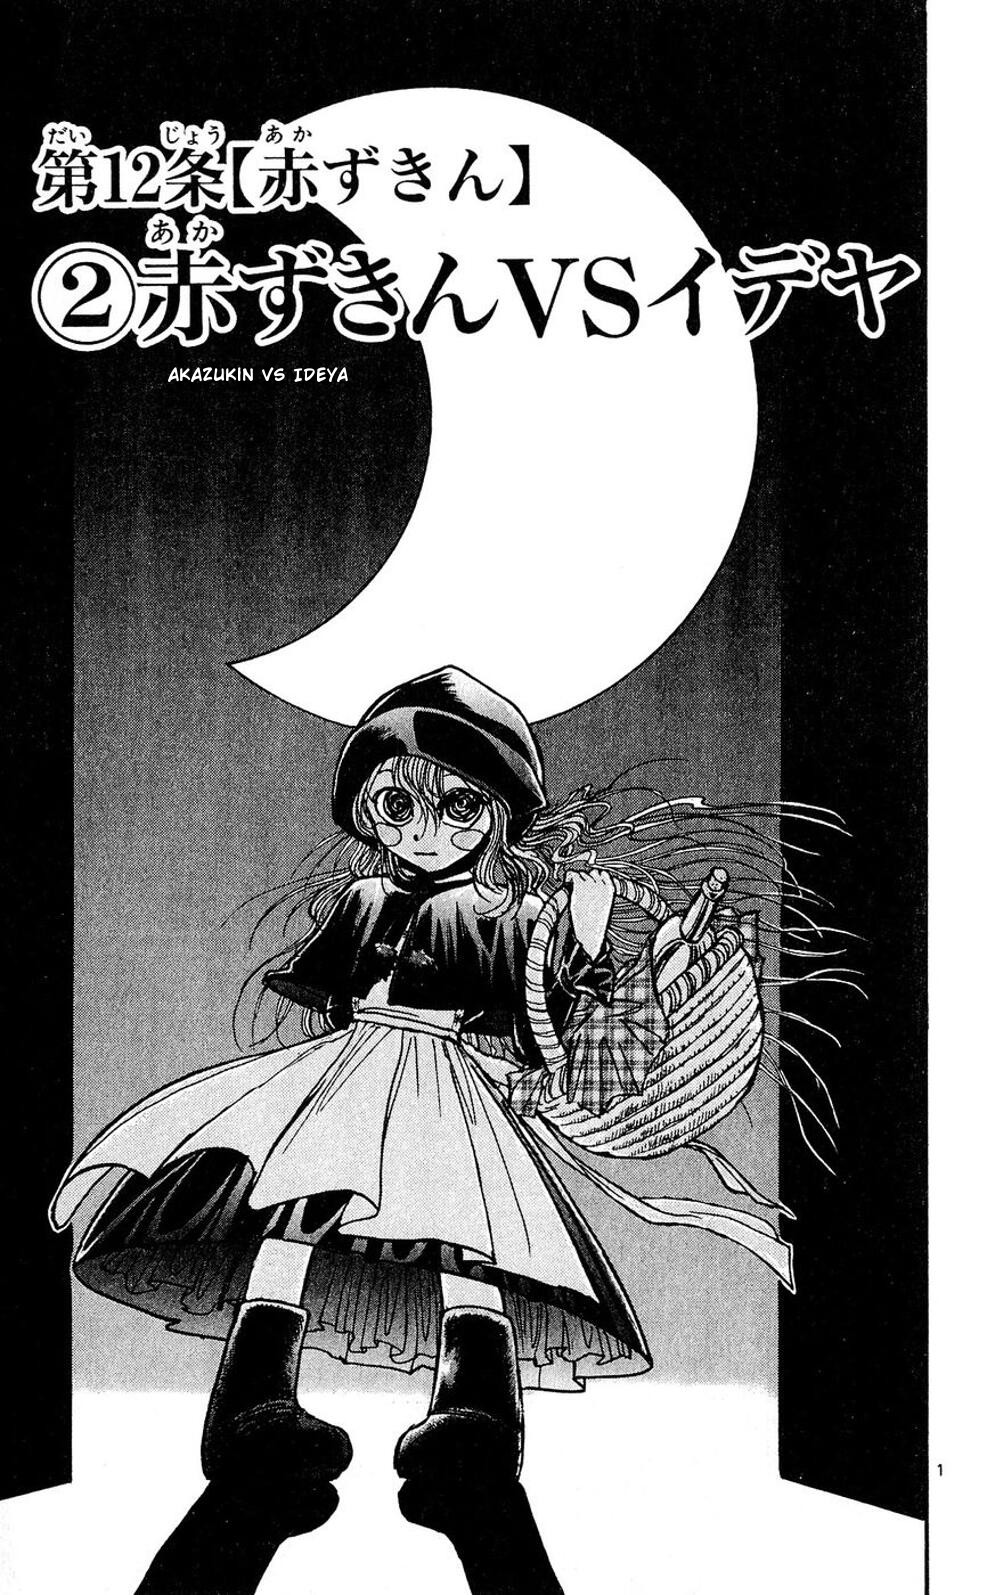 Moonlight Act Vol. 6 Ch. 46 12th Article Little Red Riding Hood Part 2